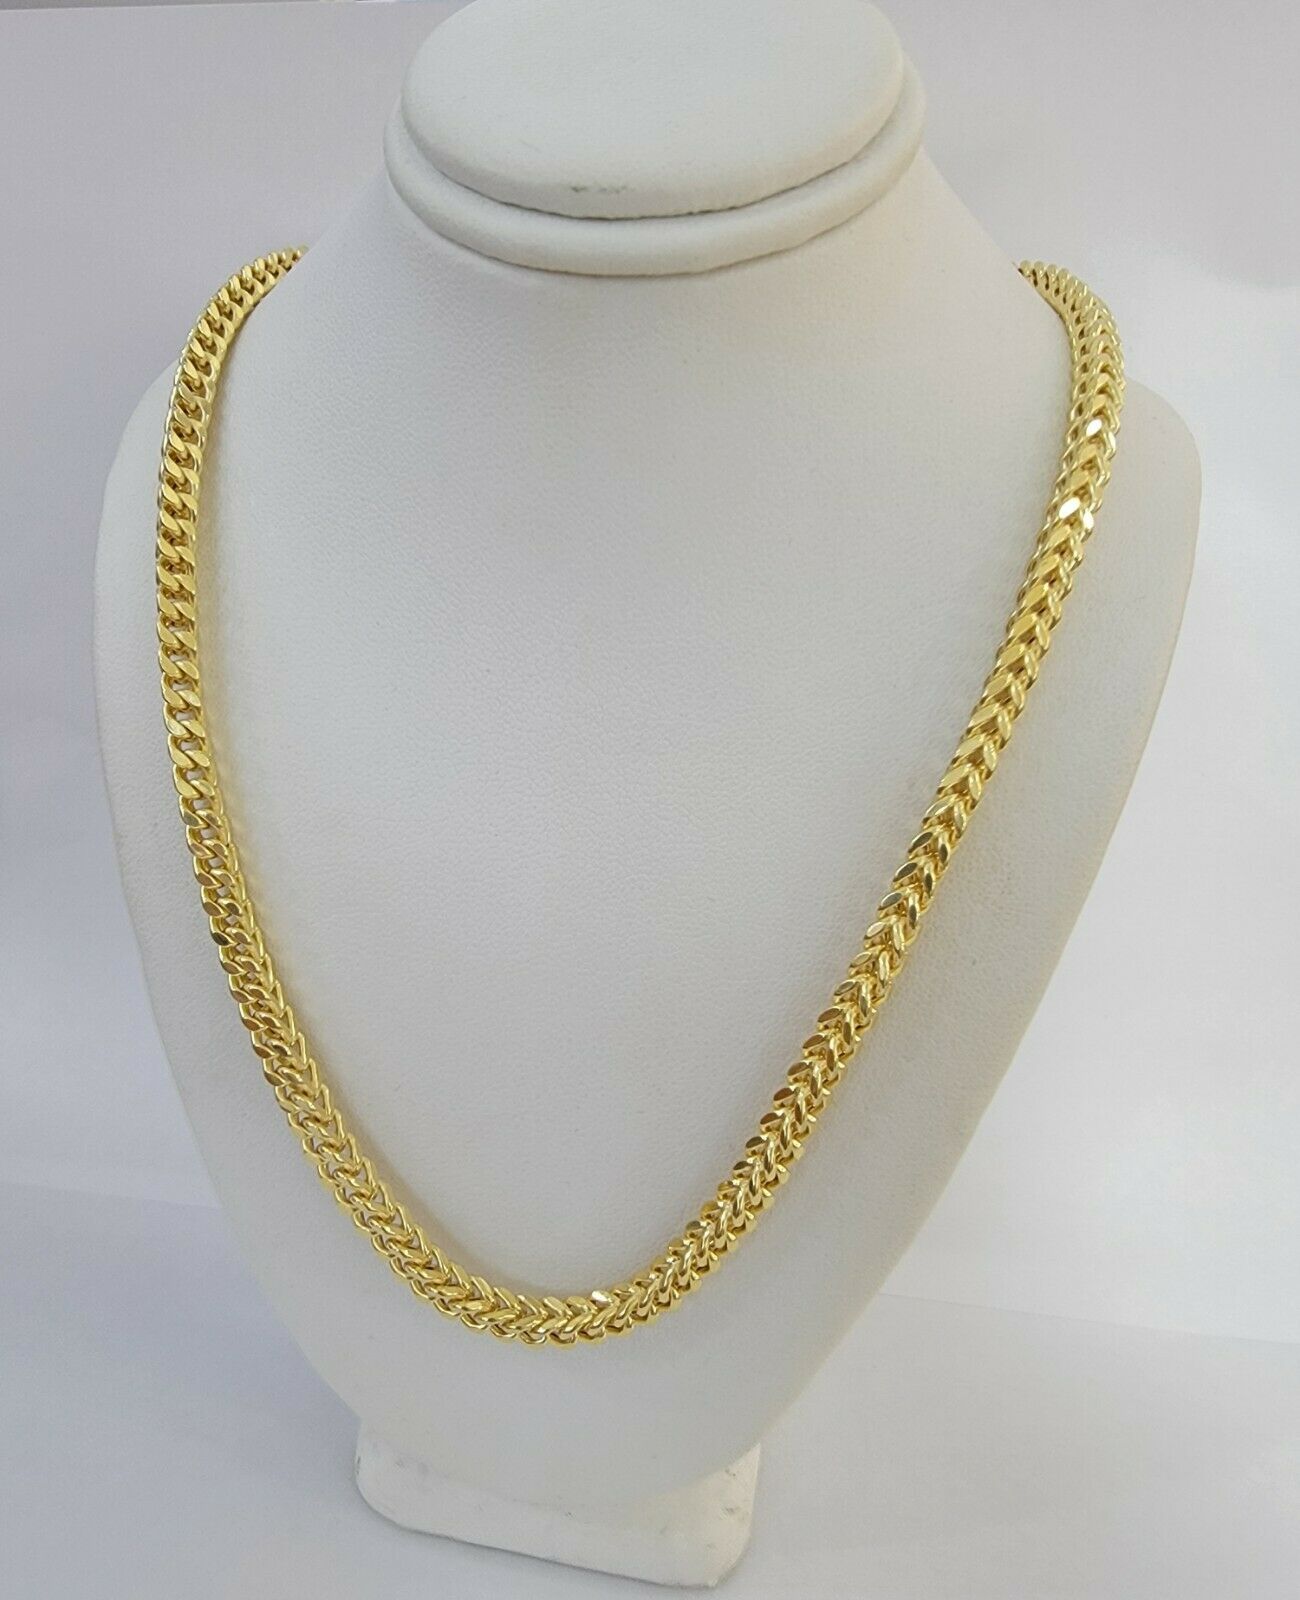 10K Gold Franco Link Chain 26" Necklace 5mm Thick, REAL 10kt Men's STRONG Chain